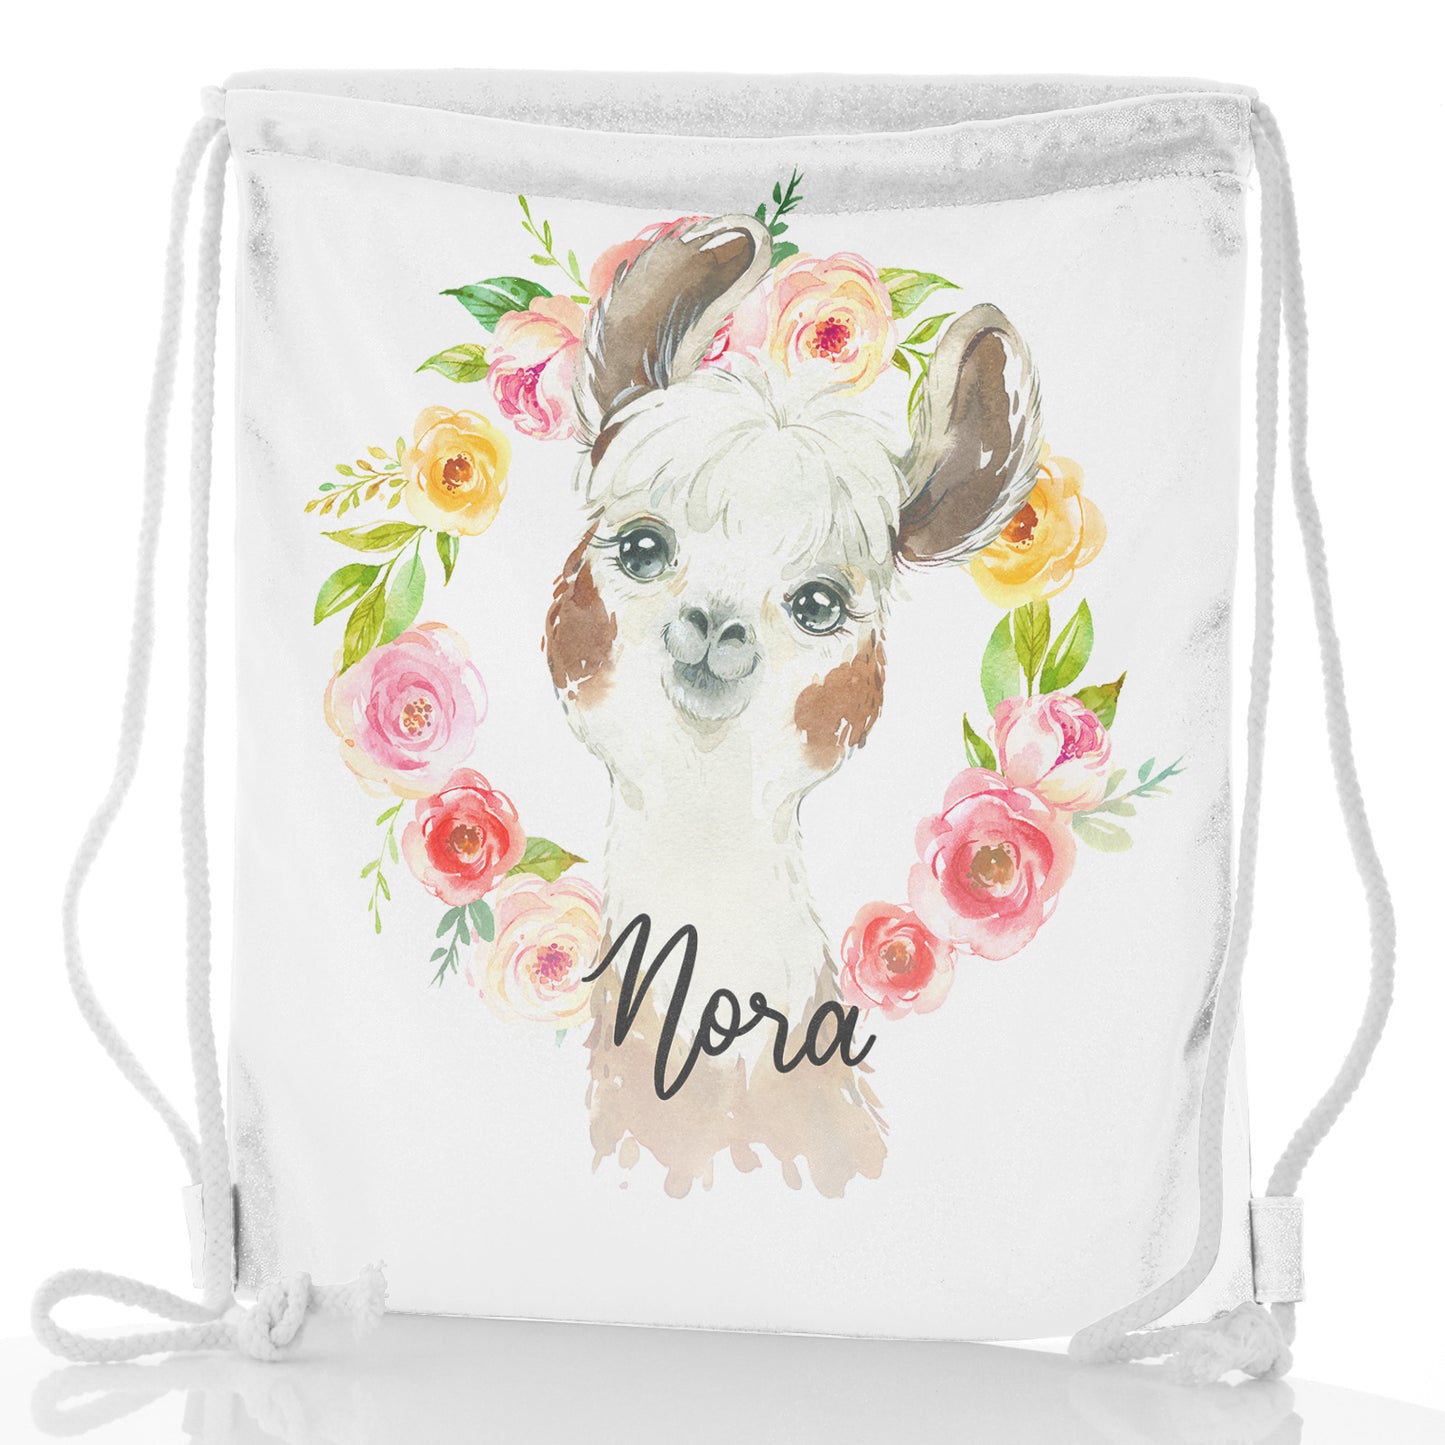 Personalised Glitter Drawstring Backpack with Brown and White Alpaca Multicolour Flower Wreath and Cute Text